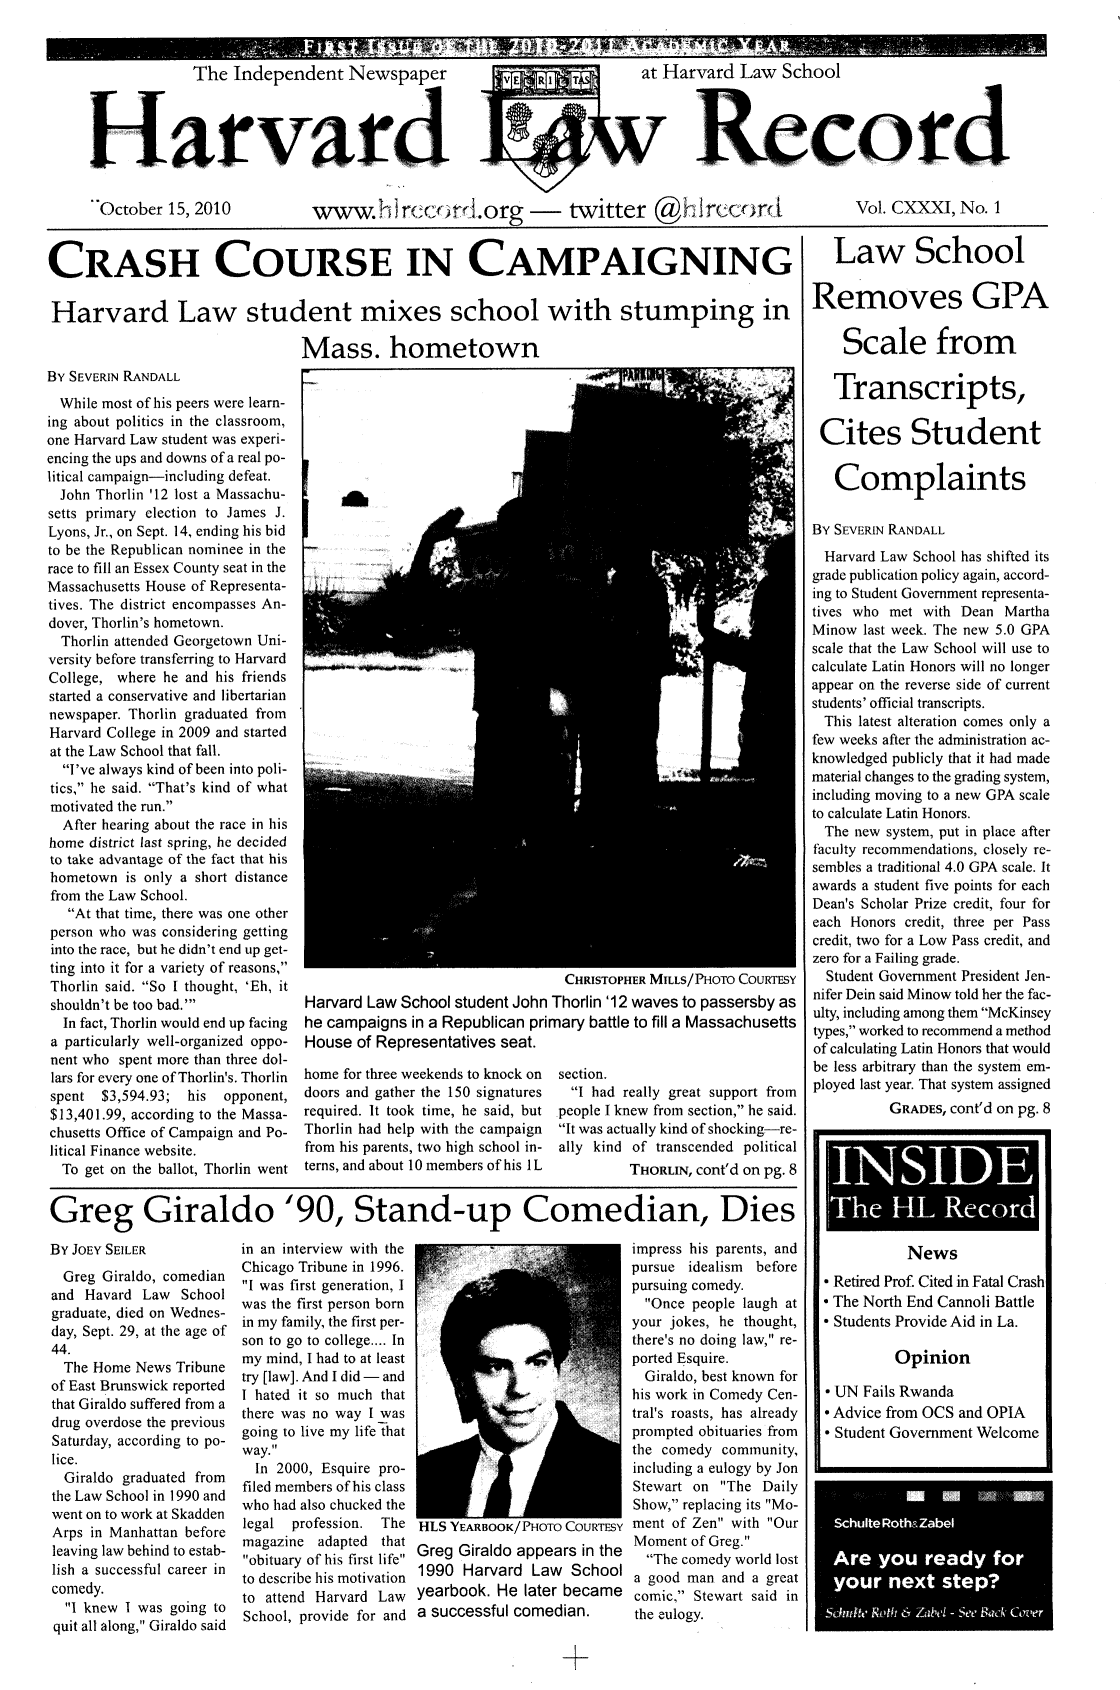 handle is hein.journals/hlrec131 and id is 1 raw text is: The Independent Newspaper  E         at Harvard Law SchoolarvardcOctober 15, 2010  wwgred Or -         twitter @  rTcCOR       Vol. CXXXI, No. 1CRASH COURSE IN CAMPAIGNINGHarvard Law student mixes school with stumping inMass. hometownBy SEVERIN RANDALLWhile most of his peers were learn-ing about politics in the classroom,one Harvard Law student was experi-encing the ups and downs of a real po-litical campaign-including defeat.John Thorlin '12 lost a Massachu-setts primary election to James J.Lyons, Jr., on Sept. 14, ending his bidto be the Republican nominee in therace to fill an Essex County seat in theMassachusetts House of Representa-tives. The district encompasses An-dover, Thorlin's hometown.Thorlin attended Georgetown Uni-versity before transferring to HarvardCollege, where he and his friendsstarted a conservative and libertariannewspaper. Thorlin graduated fromHarvard College in 2009 and startedat the Law School that fall.I've always kind of been into poli-tics, he said. That's kind of whatmotivated the run.After hearing about the race in hishome district last spring, he decidedto take advantage of the fact that hishometown is only a short distancefrom the Law School.At that time, there was one otherperson who was considering gettinginto the race, but he didn't end up get-ting into it for a variety of reasons,Thorlin said. So I thought, 'Eh, itshouldn't be too bad.'In fact, Thorlin would end up facinga particularly well-organized oppo-nent who spent more than three dol-lars for every one of Thorlin's. Thorlinspent $3,594.93;  his  opponent,$13,401.99, according to the Massa-chusetts Office of Campaign and Po-litical Finance website.To get on the ballot, Thorlin wentCHRISTOPHER MILLS/PHOTO COURTESYHarvard Law School student John Thorlin '12 waves to passersby ashe campaigns in a Republican primary battle to fill a MassachusettsHouse of Representatives seat.home for three weekends to knock ondoors and gather the 150 signaturesrequired. It took time, he said, butThorlin had help with the campaignfrom his parents, two high school in-terns, and about 10 members of his ILsection.I had really great support frompeople I knew from section, he said.It was actually kind of shocking-re-ally kind of transcended politicalTHORLIN, cont'd on pg. 8Greg Giraldo '90, Stand-up Comedian, DiesBY JOEY SElLERGreg Giraldo, comedianand Havard Law Schoolgraduate, died on Wednes-day, Sept. 29, at the age of44.The Home News Tribuneof East Brunswick reportedthat Giraldo suffered from adrug overdose the previousSaturday, according to po-lice.Giraldo graduated fromthe Law School in 1990 andwent on to work at SkaddenArps in Manhattan beforeleaving law behind to estab-lish a successful career incomedy.I knew I was going toquit all along, Giraldo saidin an interview with theChicago Tribune in 1996.I was first generation, Iwas the first person bornin my family, the first per-son to go to college.... Inmy mind, I had to at leasttry [law]. And I did - andI hated it so much thatthere was no way I wasgoing to live my life thatway.In 2000, Esquire pro-filed members of his classwho had also chucked thelegal  profession.  Themagazine adapted thatobituary of his first lifeto describe his motivationto attend Harvard LawSchool, provide for andr1Lt YEARuBuK/HOrTOiLuutYGreg Giraldo appears in the1990 Harvard Law Schoolyearbook. He later becamea successful comedian.impress his parents, andpursue idealism beforepursuing comedy.Once people laugh atyour jokes, he thought,there's no doing law, re-ported Esquire.Giraldo, best known forhis work in Comedy Cen-tral's roasts, has alreadyprompted obituaries fromthe comedy community,including a eulogy by JonStewart on The DailyShow, replacing its Mo-ment of Zen with OurMoment of Greg.The comedy world losta good man and a greatcomic, Stewart said inthe eulogy.Law SchoolRemoves GPAScale fromTranscripts,Cites StudentComplaintsBy SEVERIN RANDALLHarvard Law School has shifted itsgrade publication policy again, accord-ing to Student Government representa-tives who met with Dean MarthaMinow last week. The new 5.0 GPAscale that the Law School will use tocalculate Latin Honors will no longerappear on the reverse side of currentstudents' official transcripts.This latest alteration comes only afew weeks after the administration ac-knowledged publicly that it had madematerial changes to the grading system,including moving to a new GPA scaleto calculate Latin Honors.The new system, put in place afterfaculty recommendations, closely re-sembles a traditional 4.0 GPA scale. Itawards a student five points for eachDean's Scholar Prize credit, four foreach Honors credit, three per Passcredit, two for a Low Pass credit, andzero for a Failing grade.Student Government President Jen-nifer Dein said Minow told her the fac-ulty, including among them McKinseytypes, worked to recommend a methodof calculating Latin Honors that wouldbe less arbitrary than the system em-ployed last year. That system assignedGRADES, cont'd on pg. 8INSIDEThe HL RecordNews* Retired Prof. Cited in Fatal Crash* The North End Cannoli Battle* Students Provide Aid in La.OpinionUN Fails RwandaAdvice from OCS and OPIAStudent Government WelcomeSchulte Roth&UZabelAre you ready foryour next step?Sdndile Roth 6 Zabel - See Sack Cover**